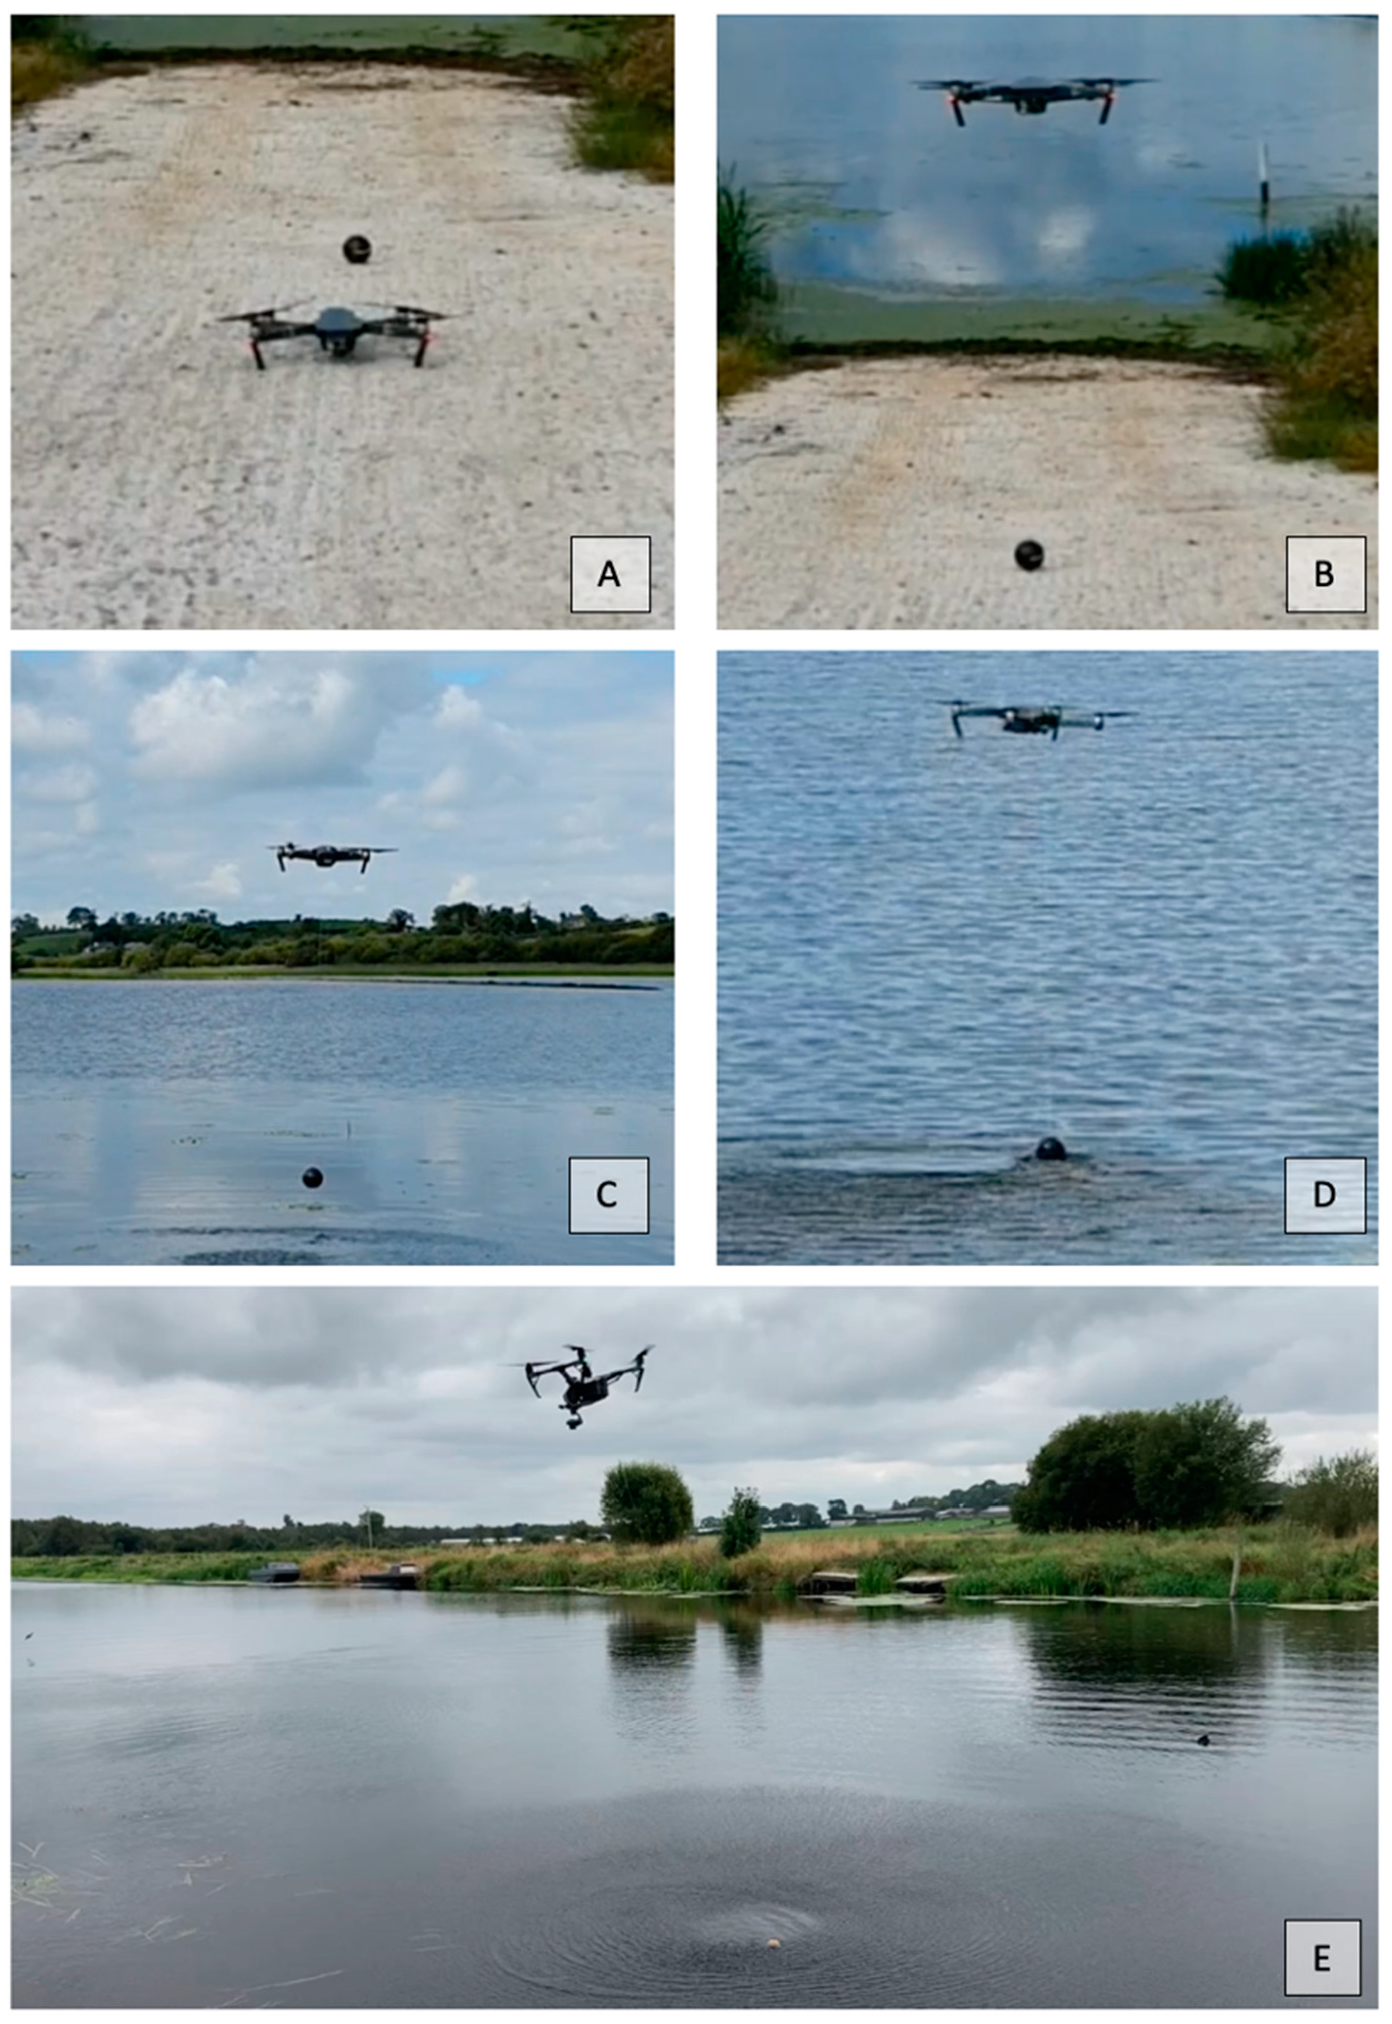 Forensic Sciences | Free Full-Text | Dronar&mdash;Geoforensic Search Sonar  from a Drone